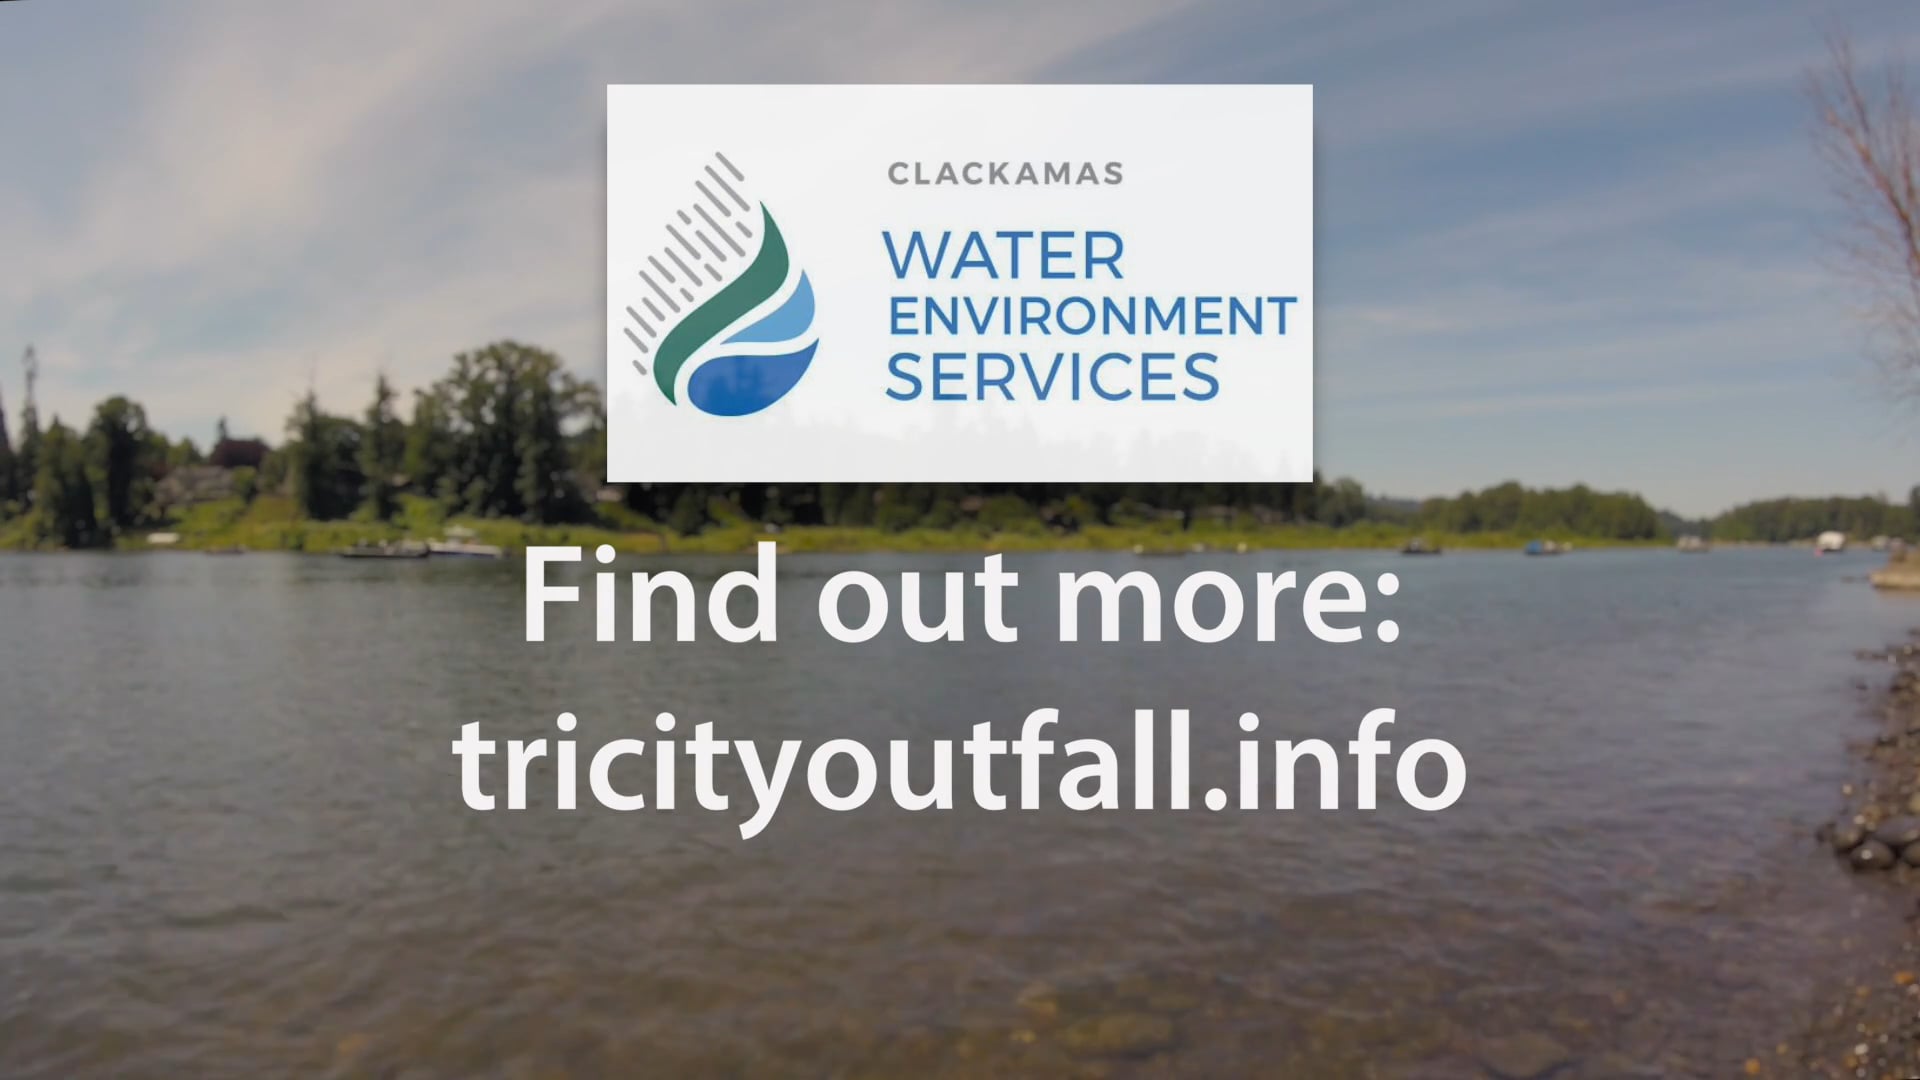 Tri-City Outfall Project - Clackamas Water Environment Services on Vimeo